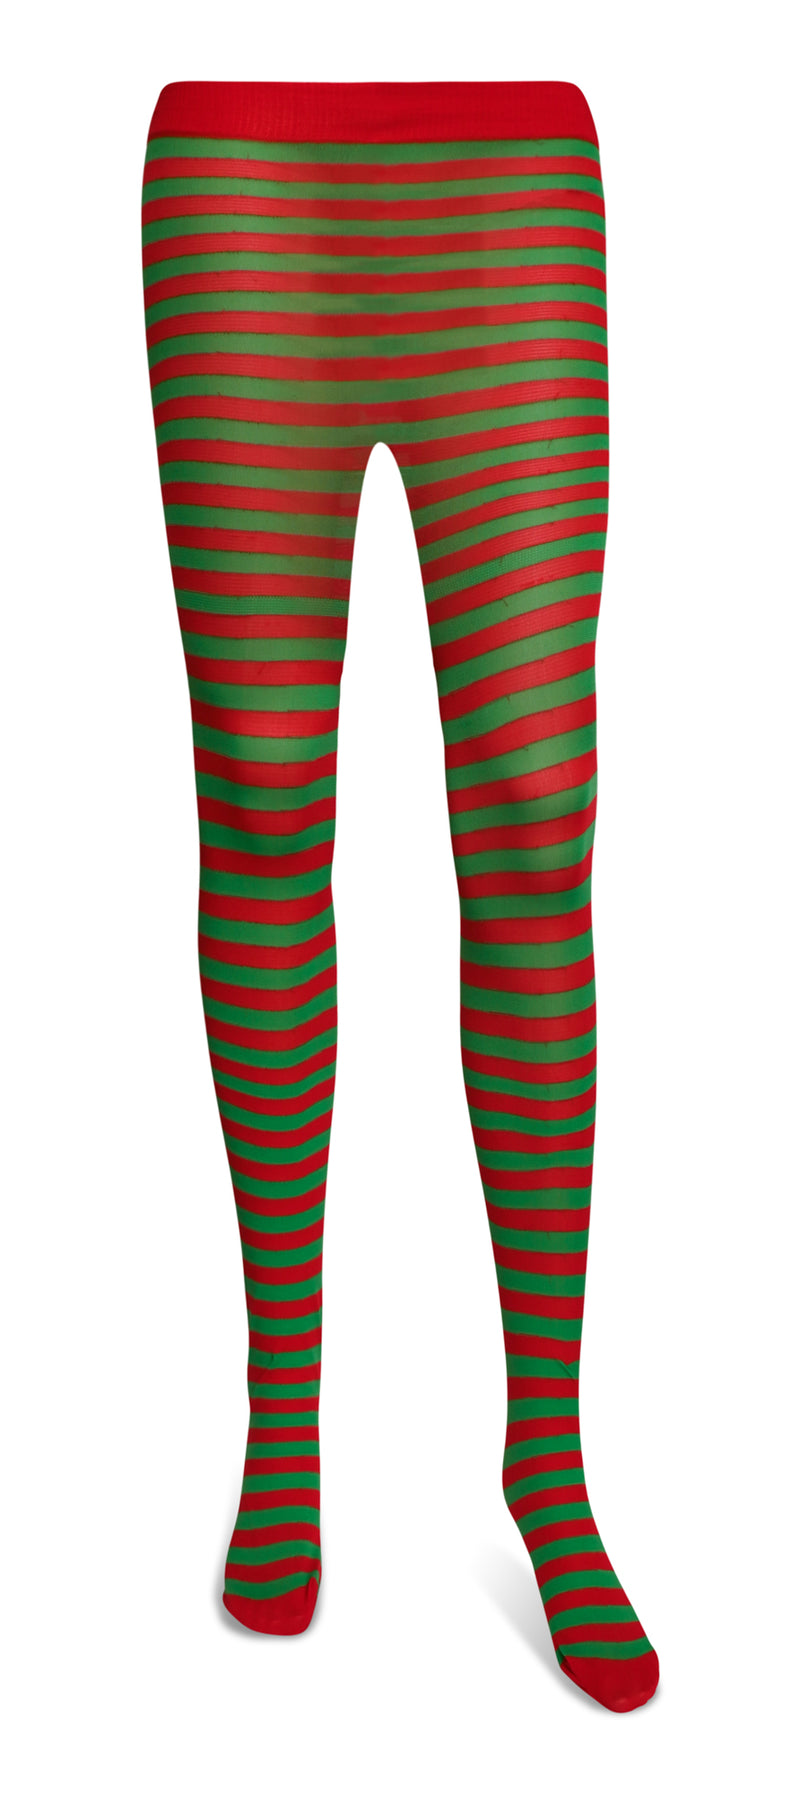 Red and Green Tights - Striped Nylon Christmas Elf Stretch Pantyhose Stocking Accessories for Every Day Attire and Costumes for Men, Women and Kids